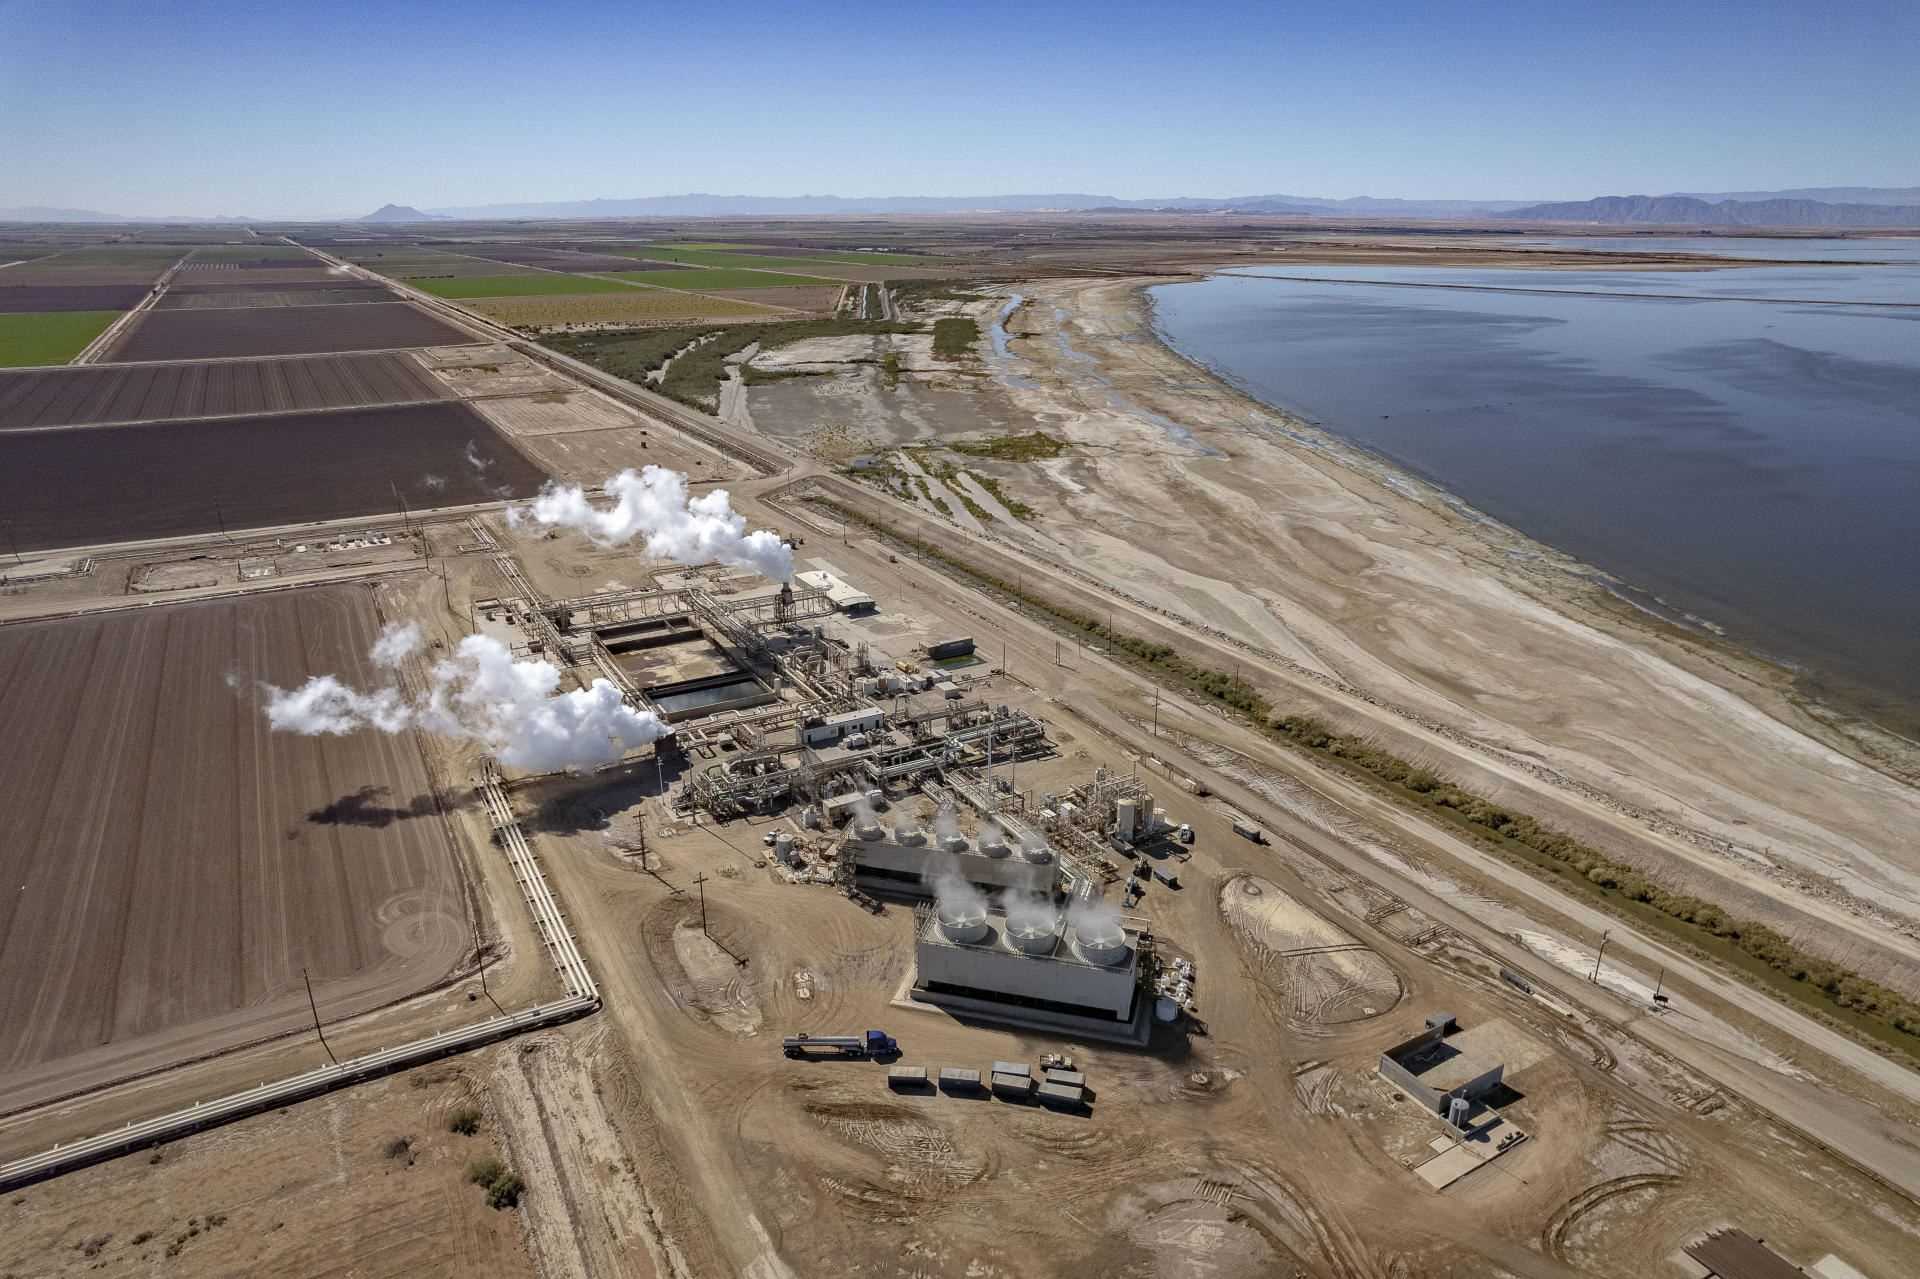 Geothermal power station, south of the Salton Sea, in Imperial Valley (California), October 27, 2021. In the background, the agricultural crops that feed part of America.